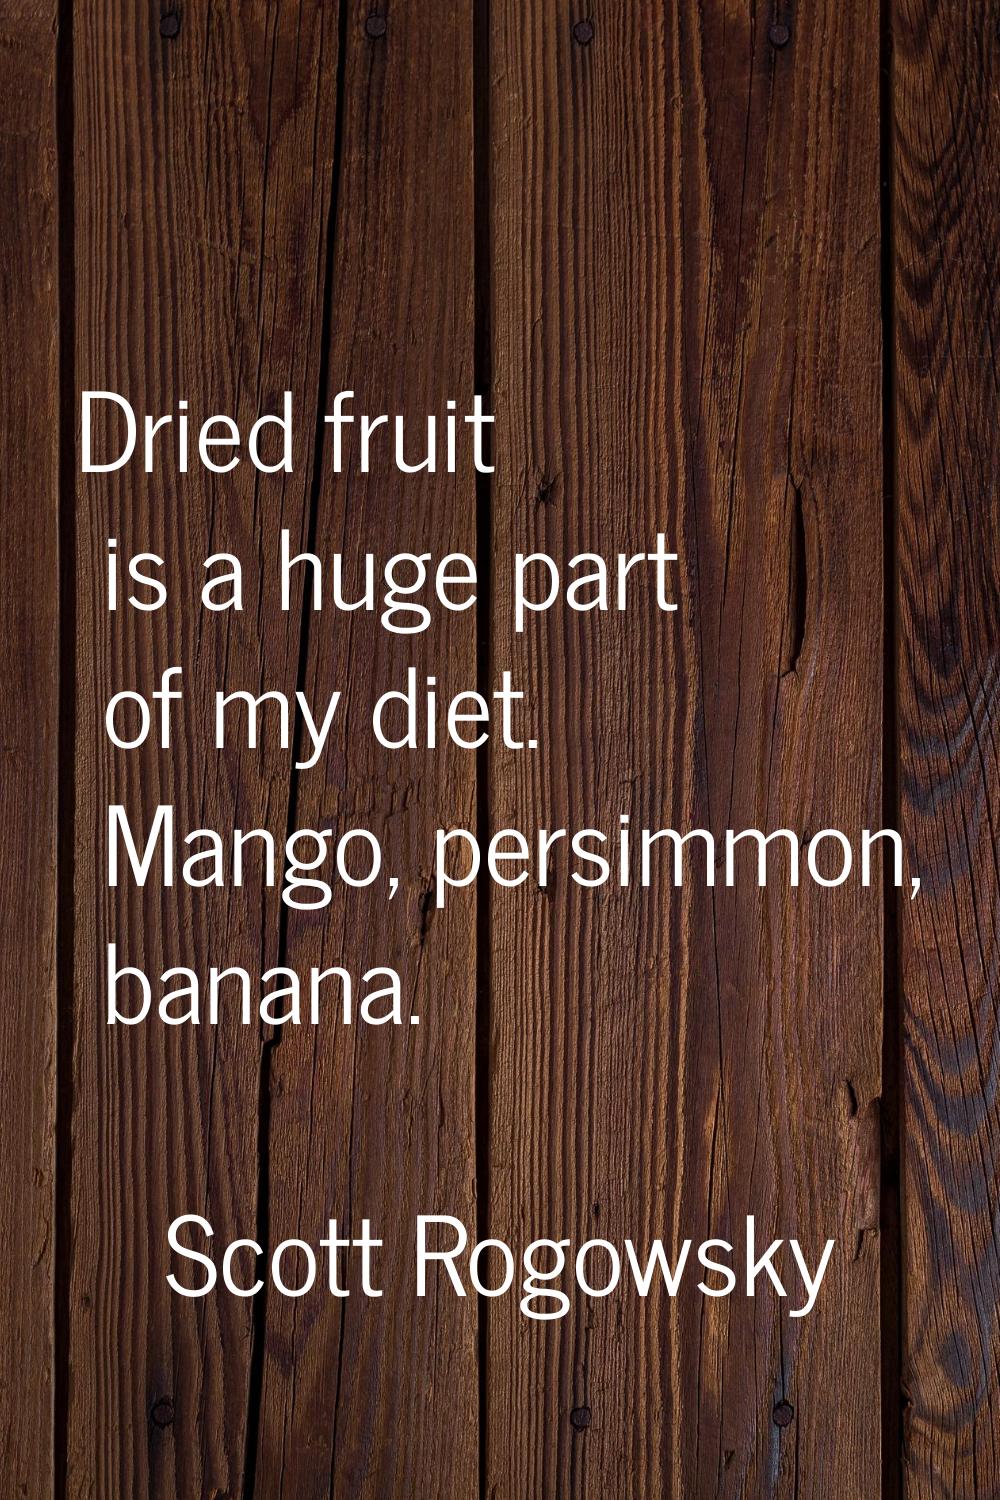 Dried fruit is a huge part of my diet. Mango, persimmon, banana.